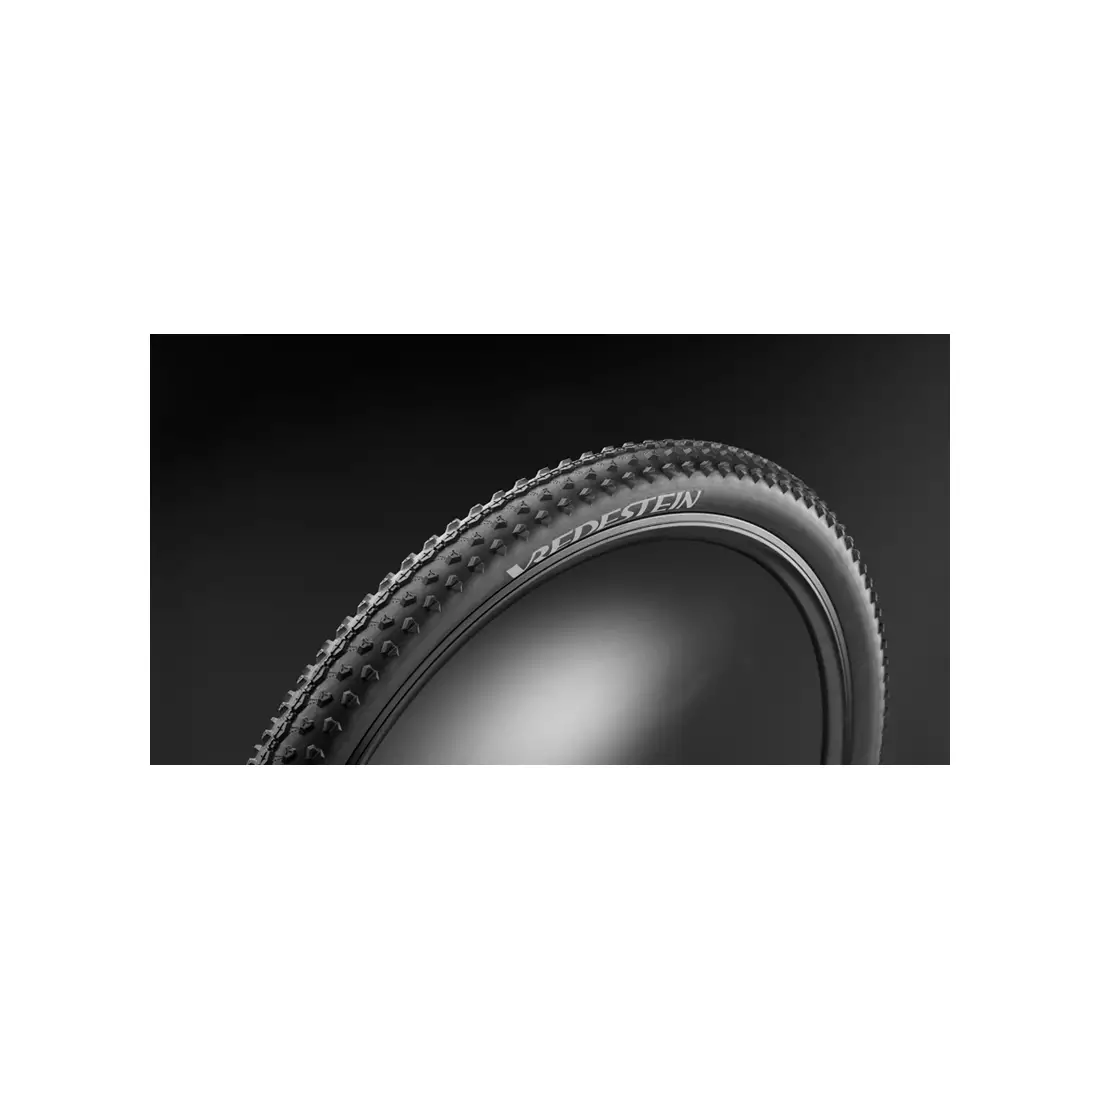 VREDESTEIN bicycle tyre mtb black panther heavy duty 29x2.20 (55-622) coiled black VRD-29330